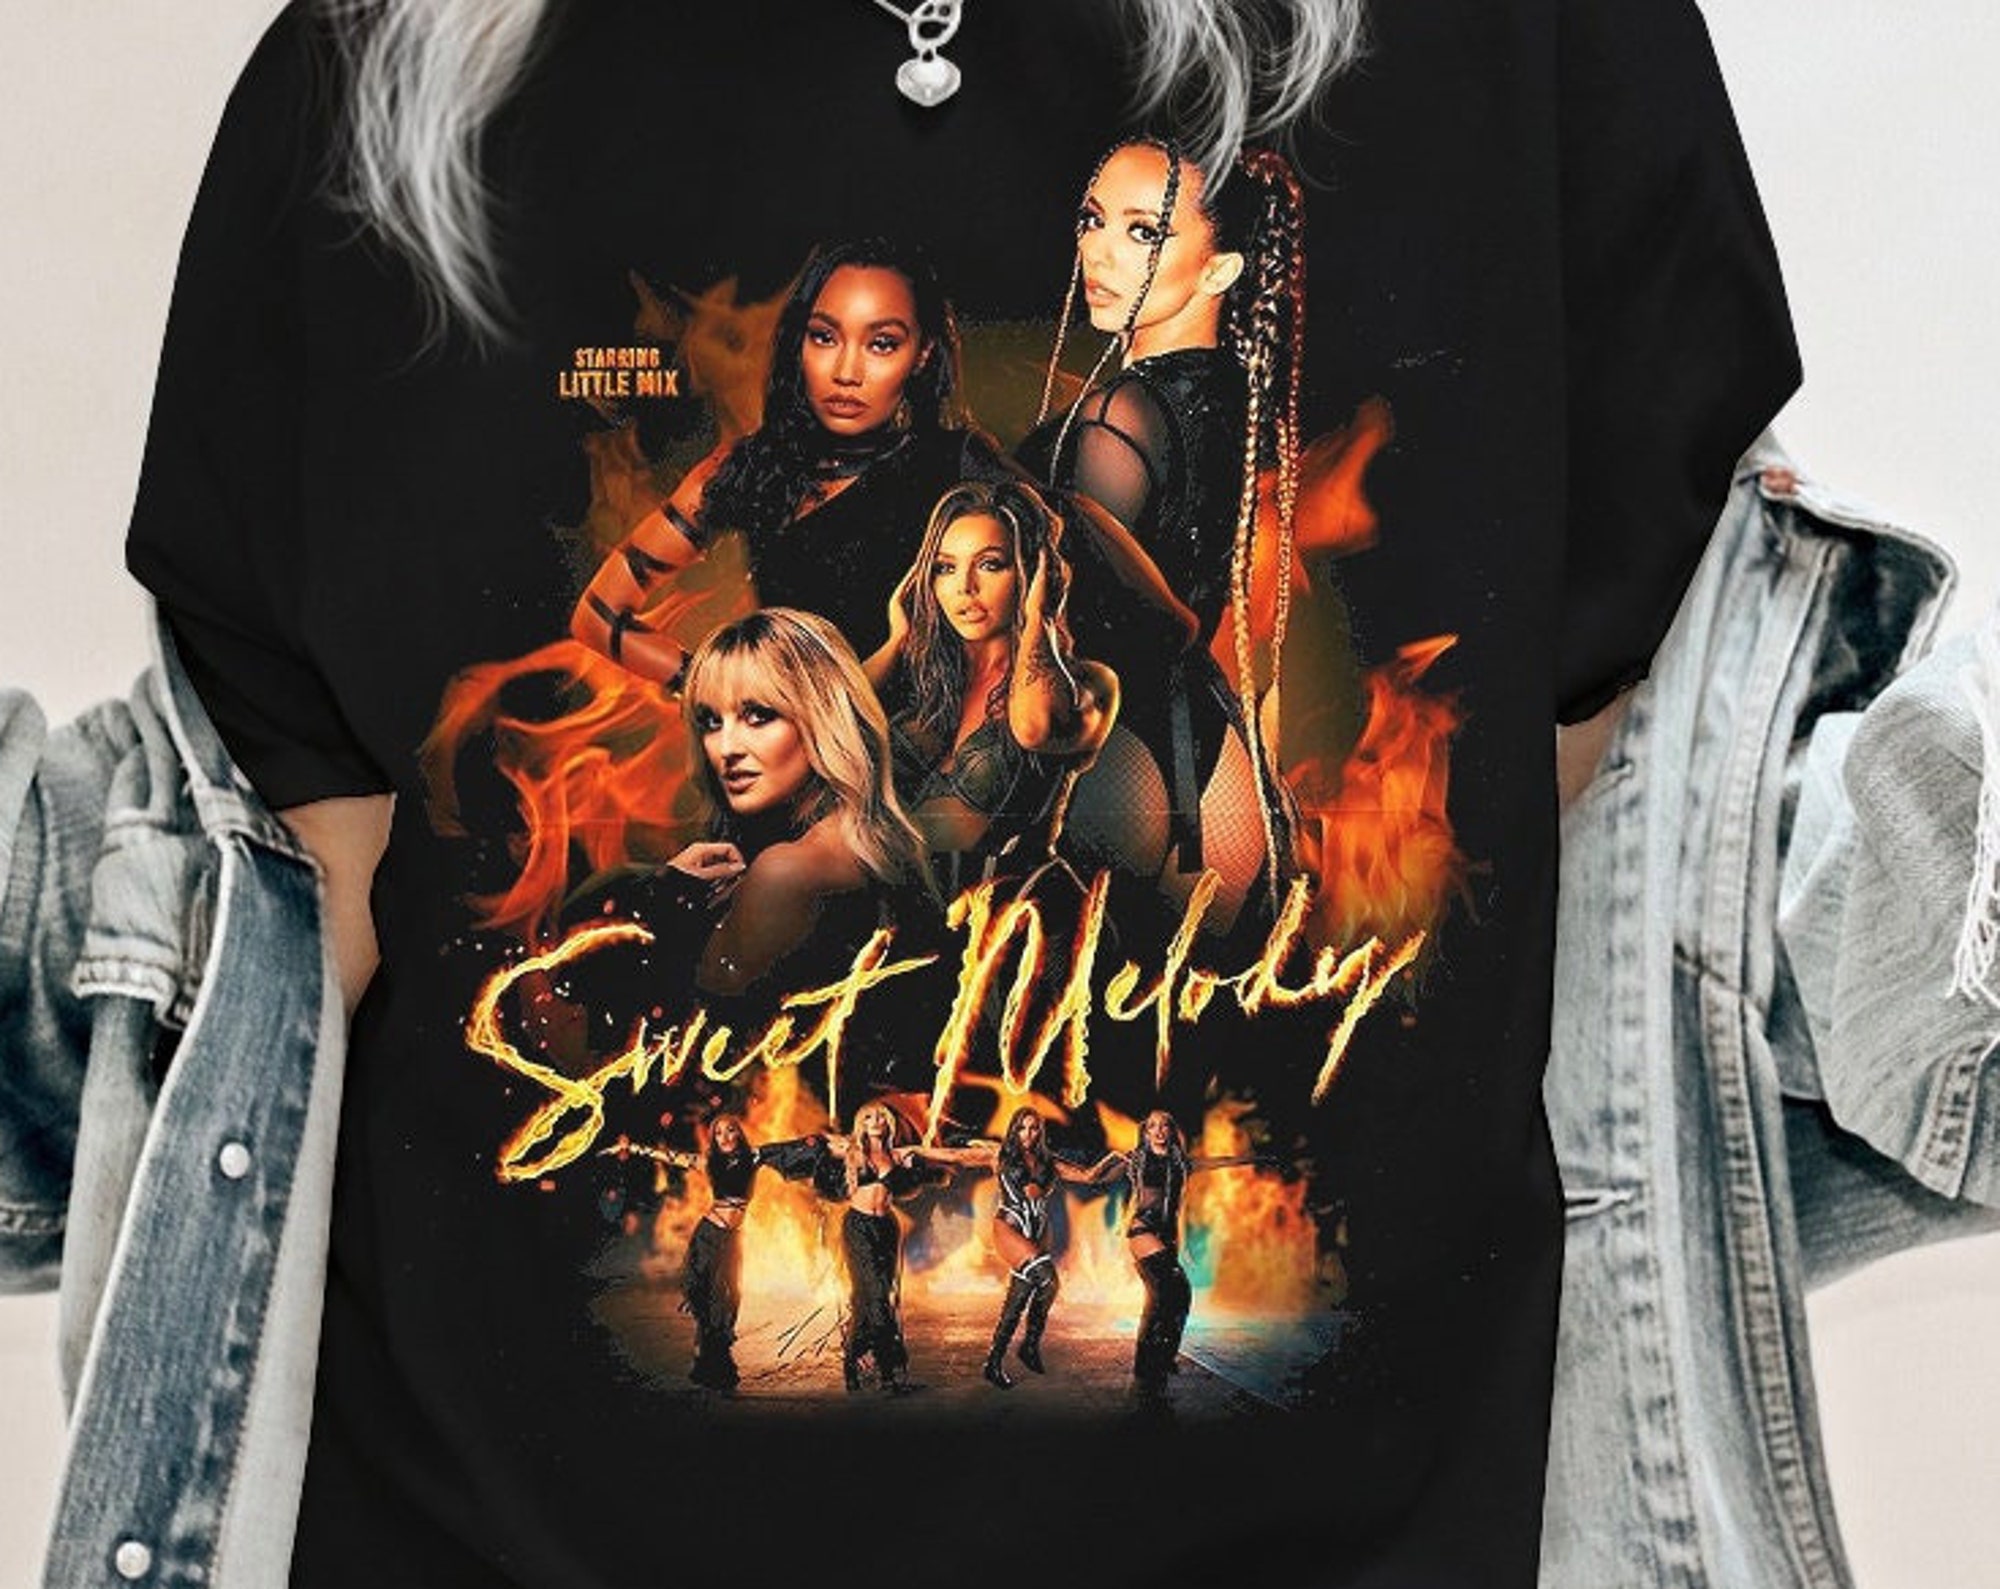 Discover Sweet Melody Little Mix The Confetti Tour 2022 Shirt, Little Mix Shirt, Little Mix Merch